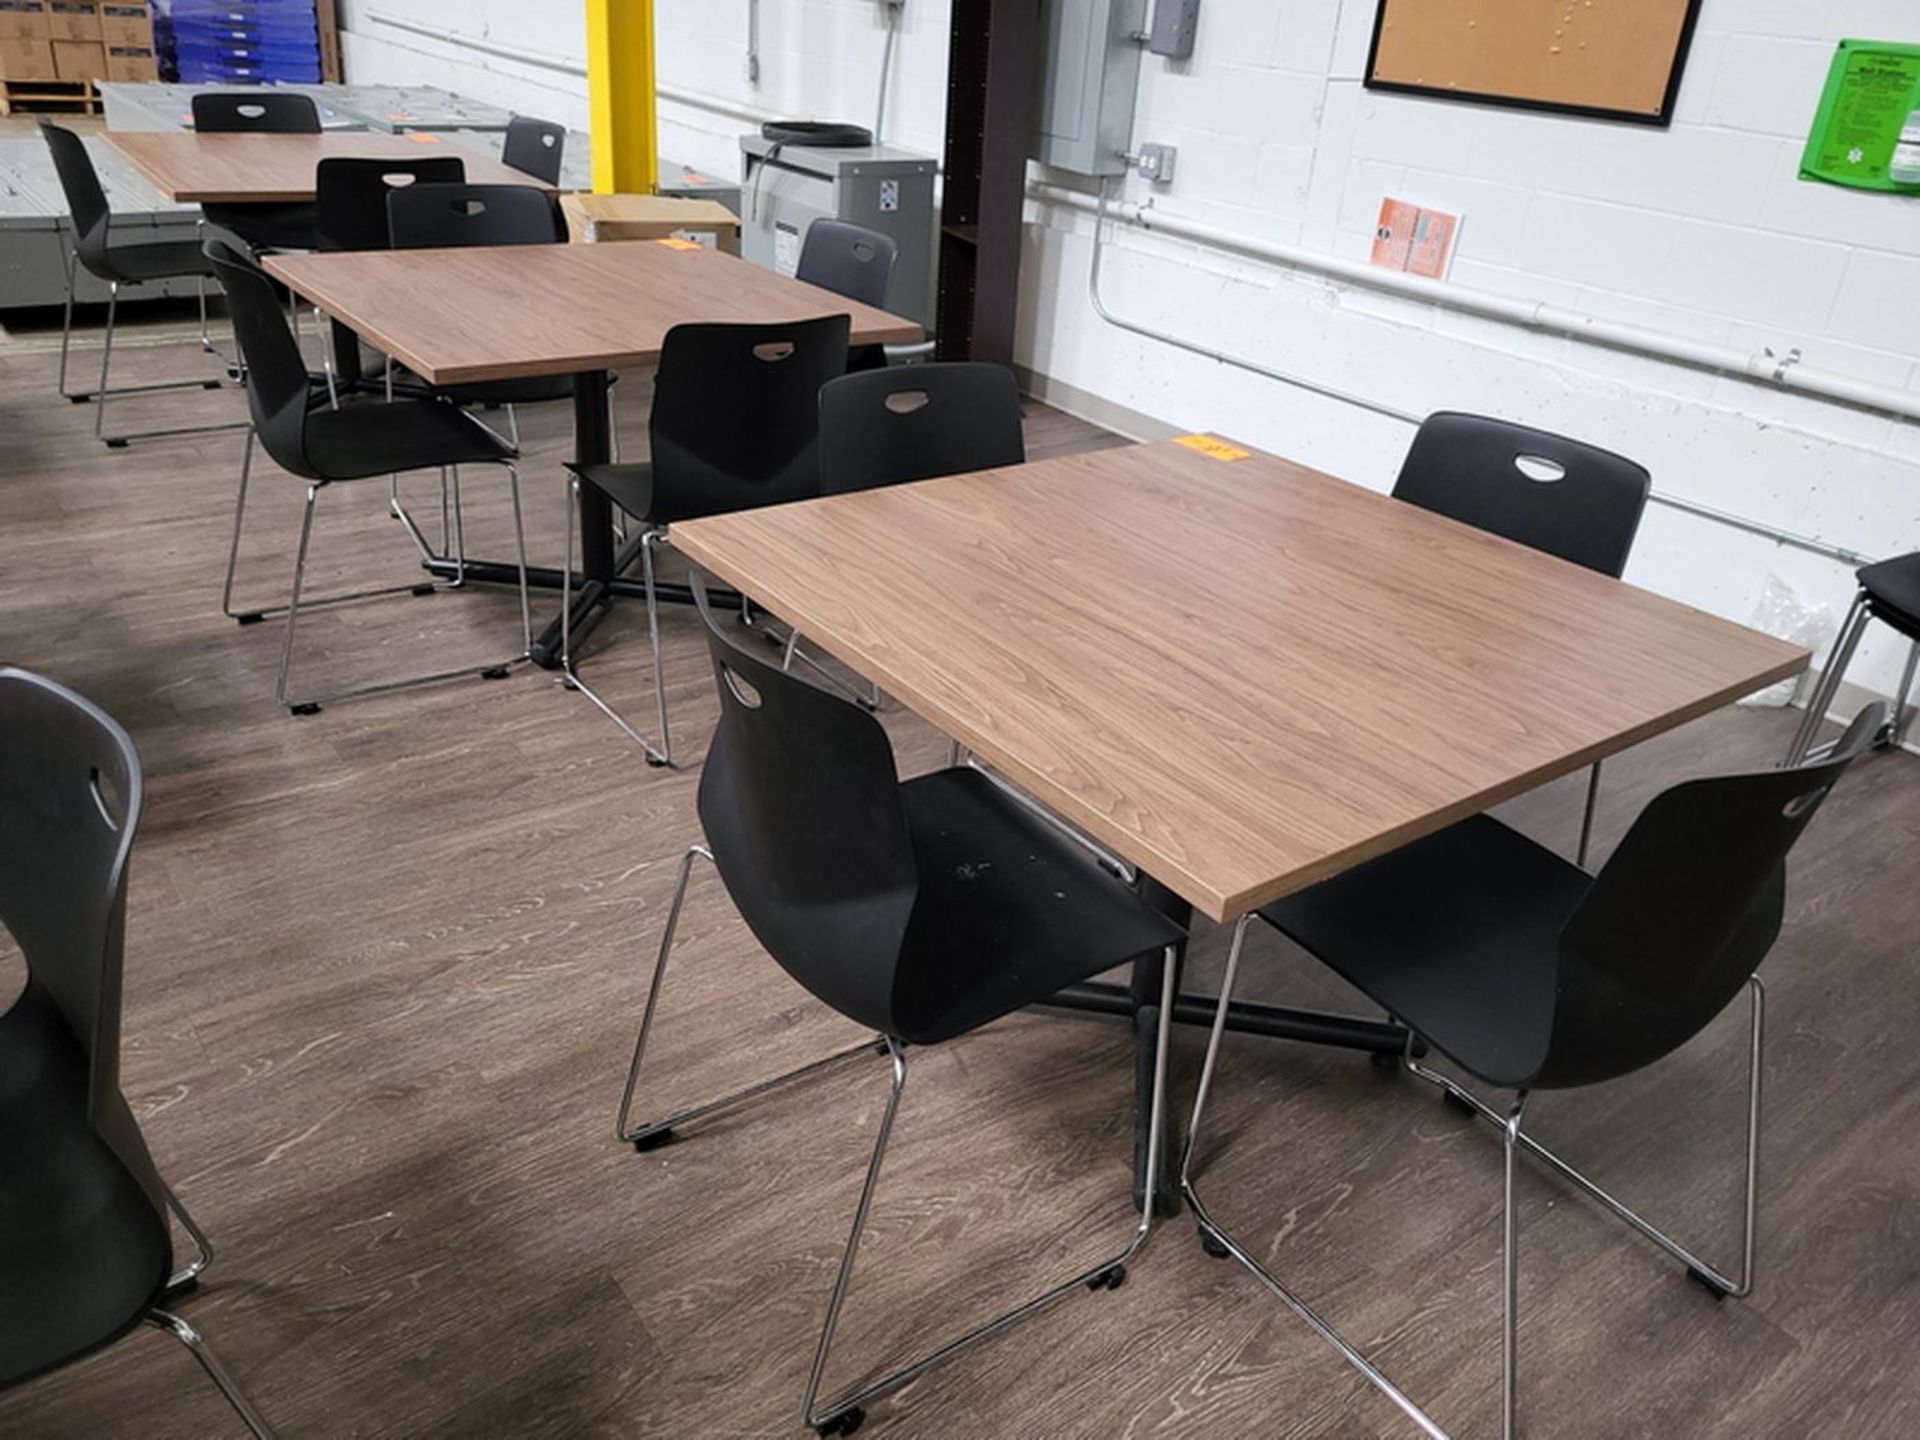 Lot - (3) Lancaster(?) Cafeteria Tables; 42 in. x 42 in. x 29.5 in. high, Includes (15) Stackable